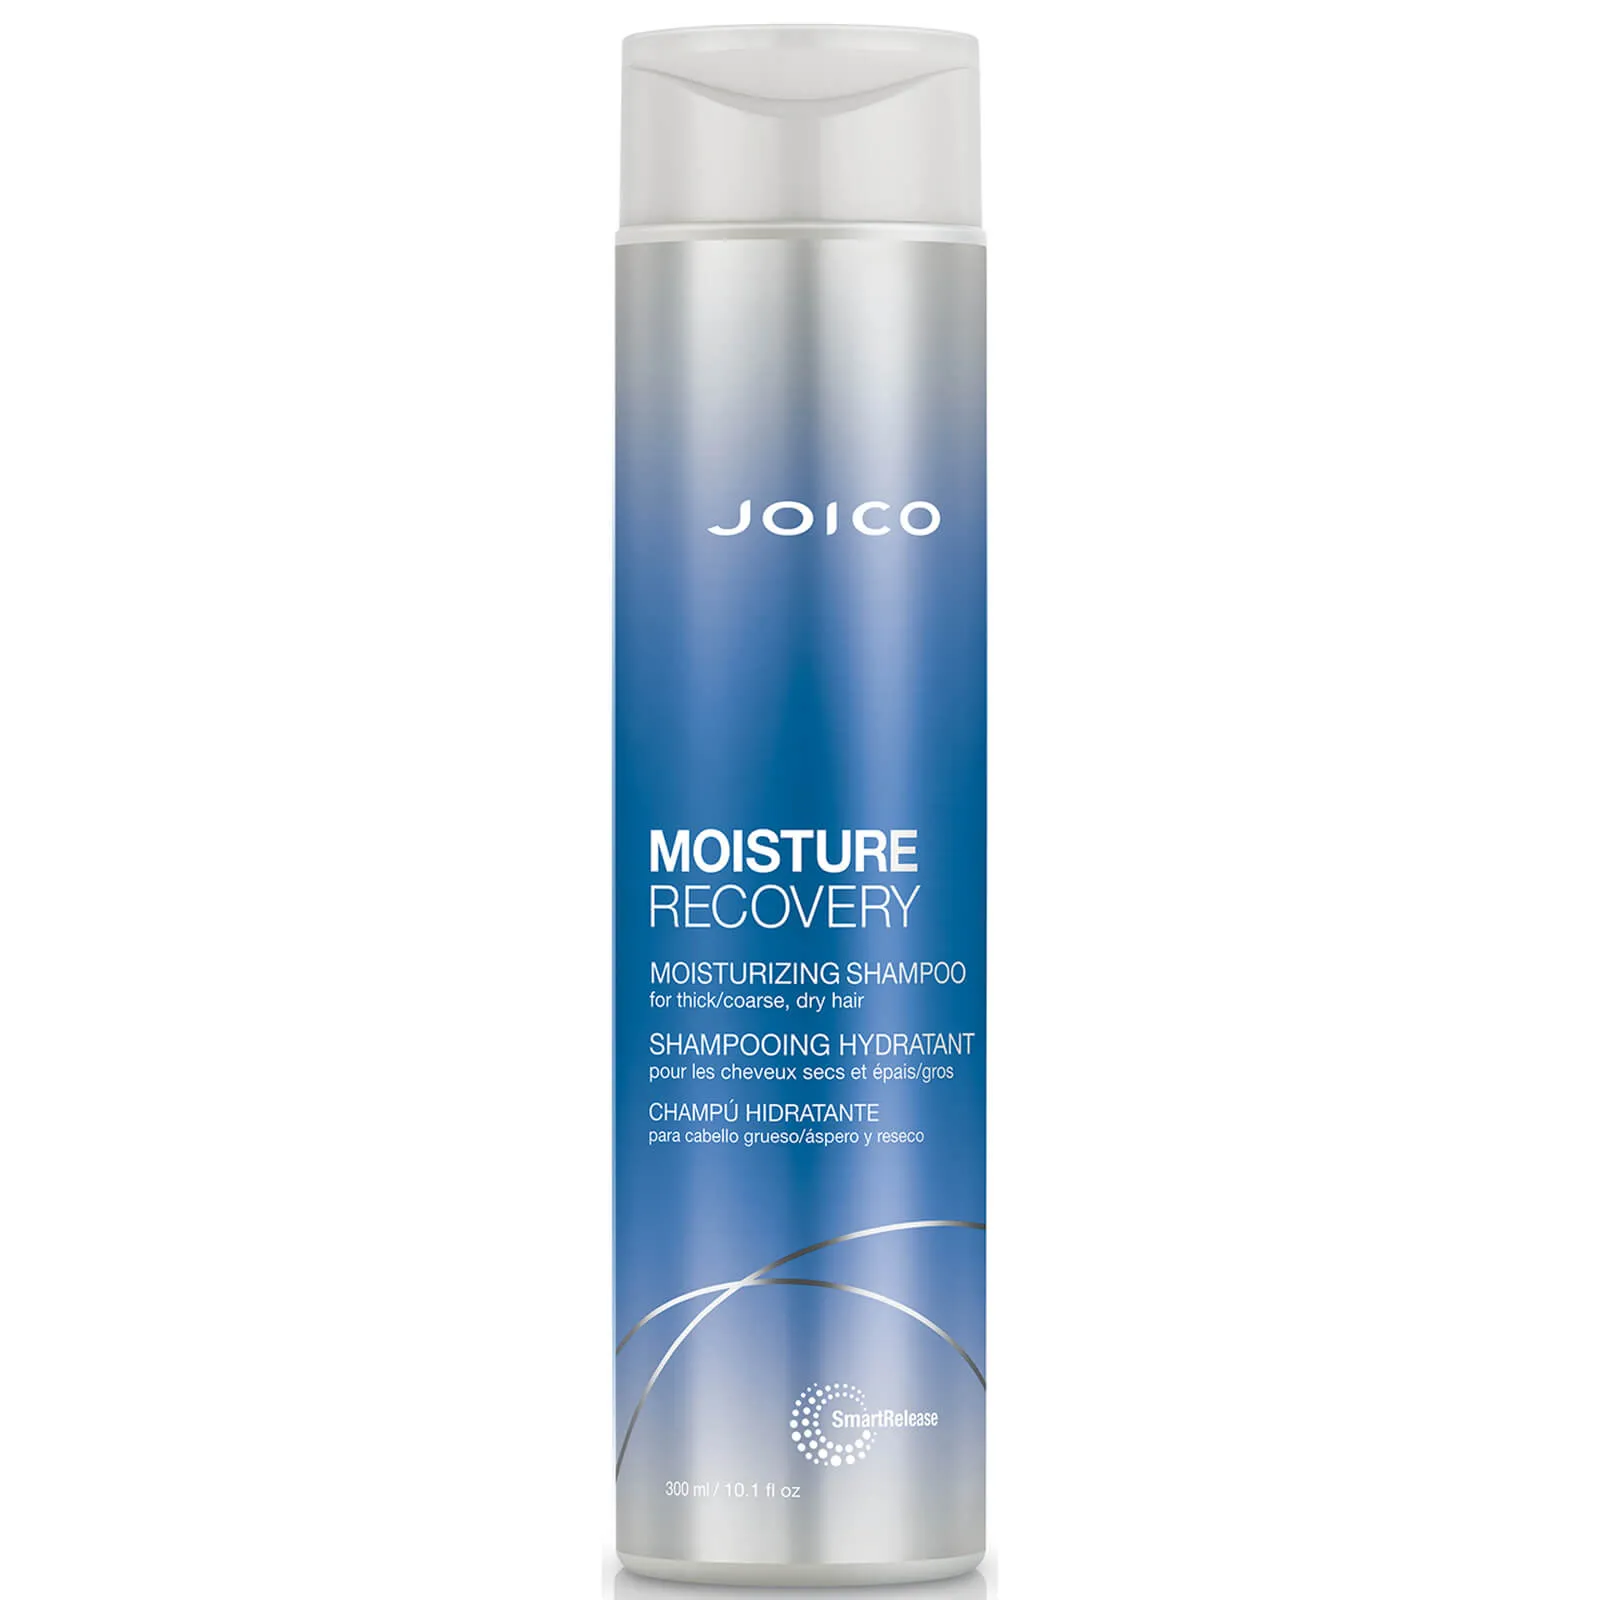  Moisture Recovery Moisturizing Shampoo For Thick-Coarse, Dry Hair 300ml